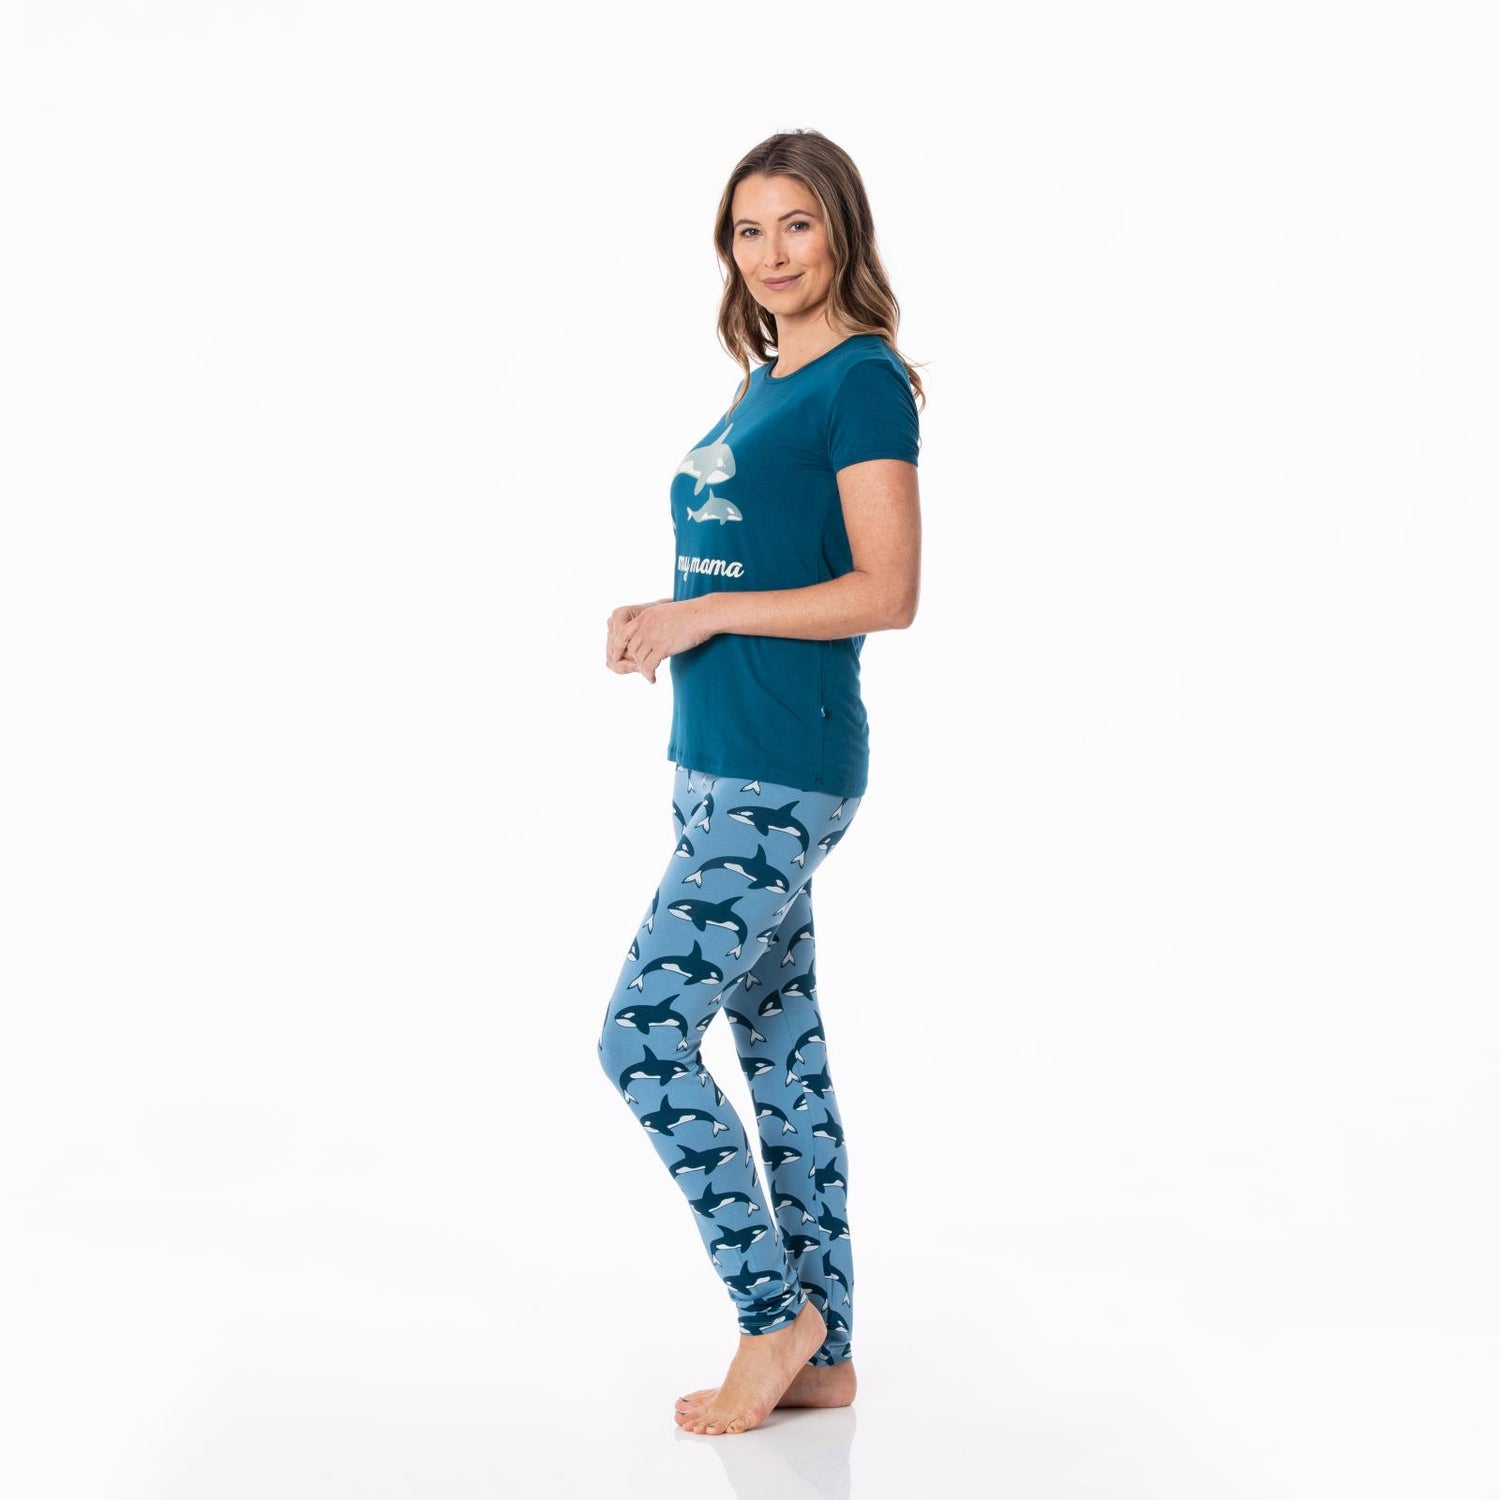 Women's Short Sleeve Graphic Tee Fitted Pajama Set in Parisian Blue Orca